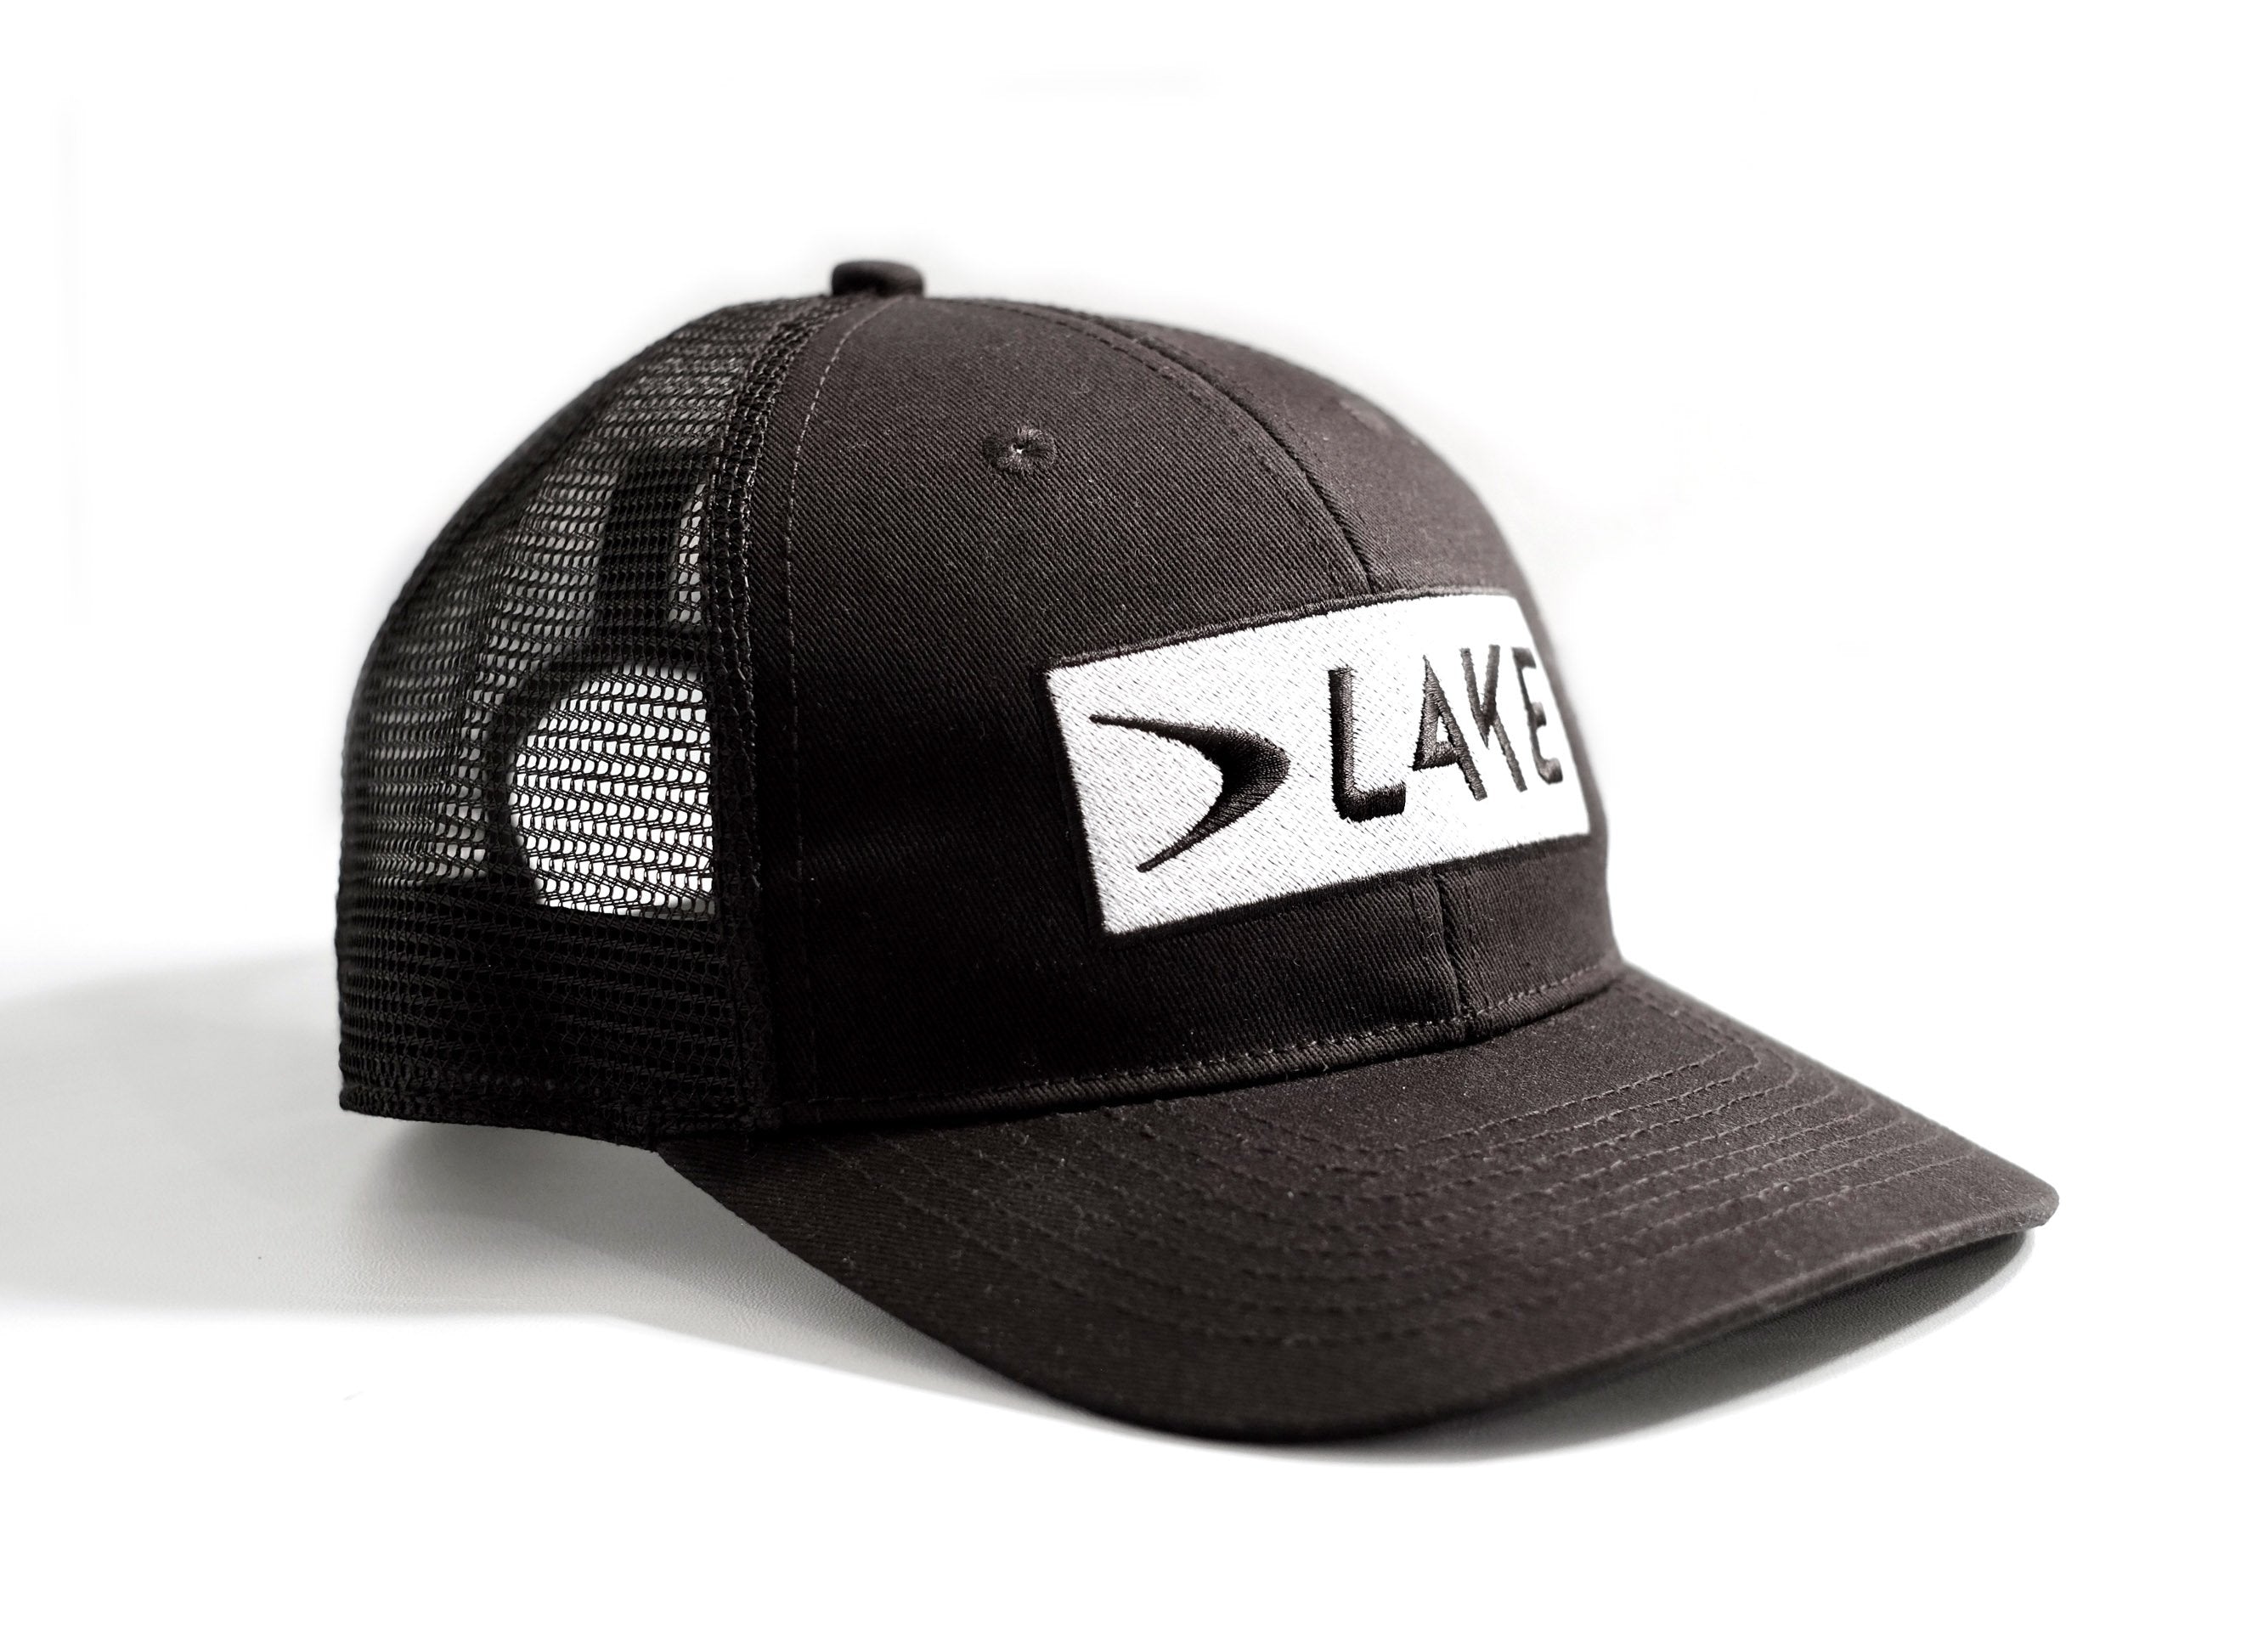 http://www.lakecycling.com/cdn/shop/products/Lake-Hat-Front_b68274f0-8f2a-45e8-a85e-e016ad2beda8.jpg?v=1622216362